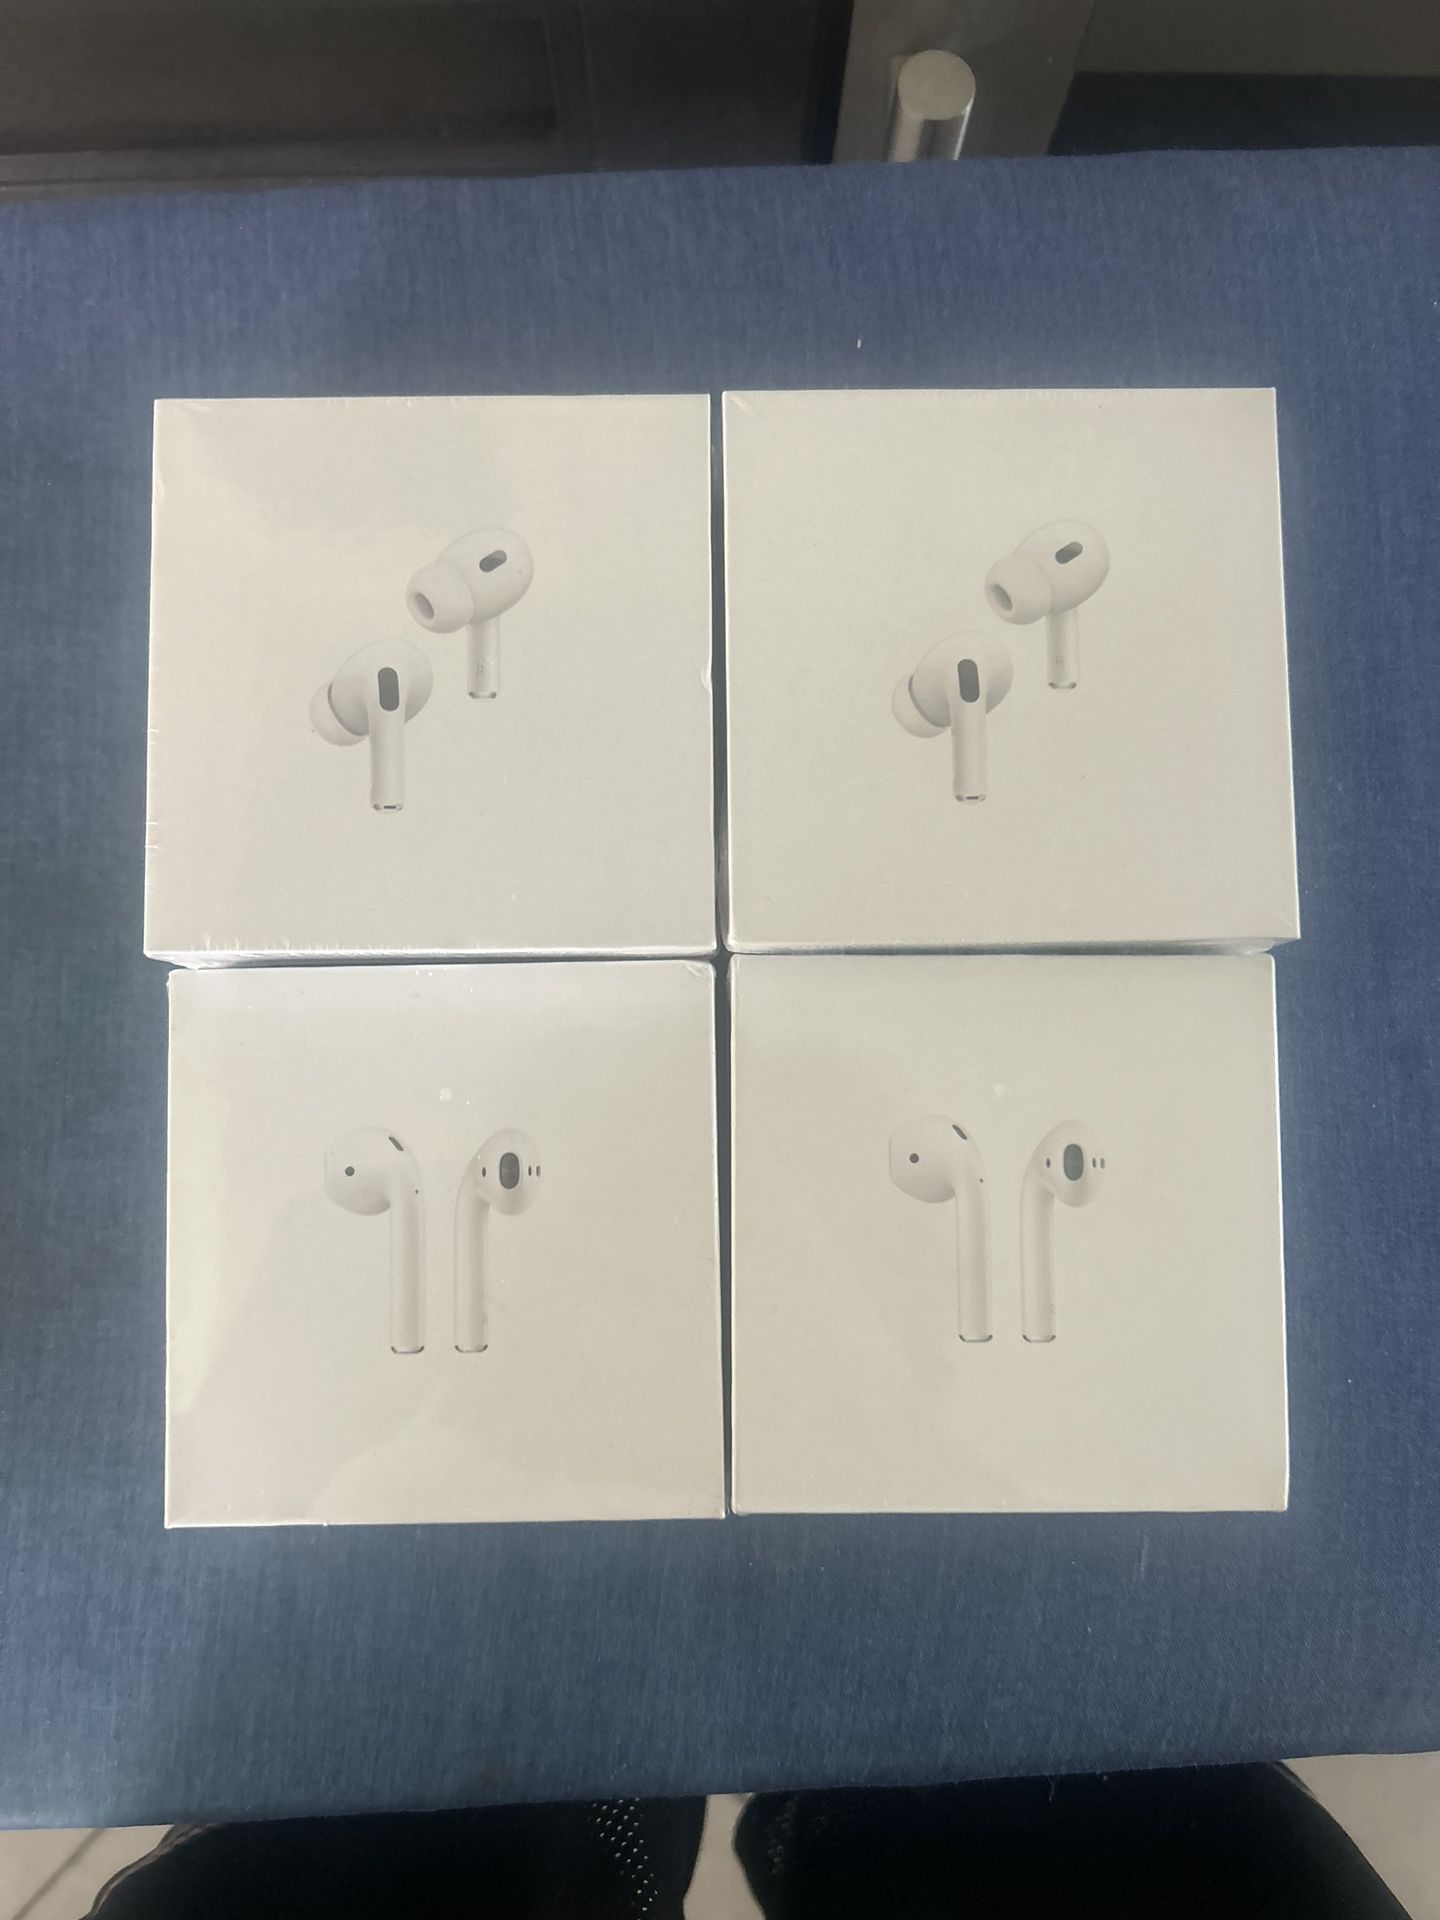 Airpods pros and 1st gen 